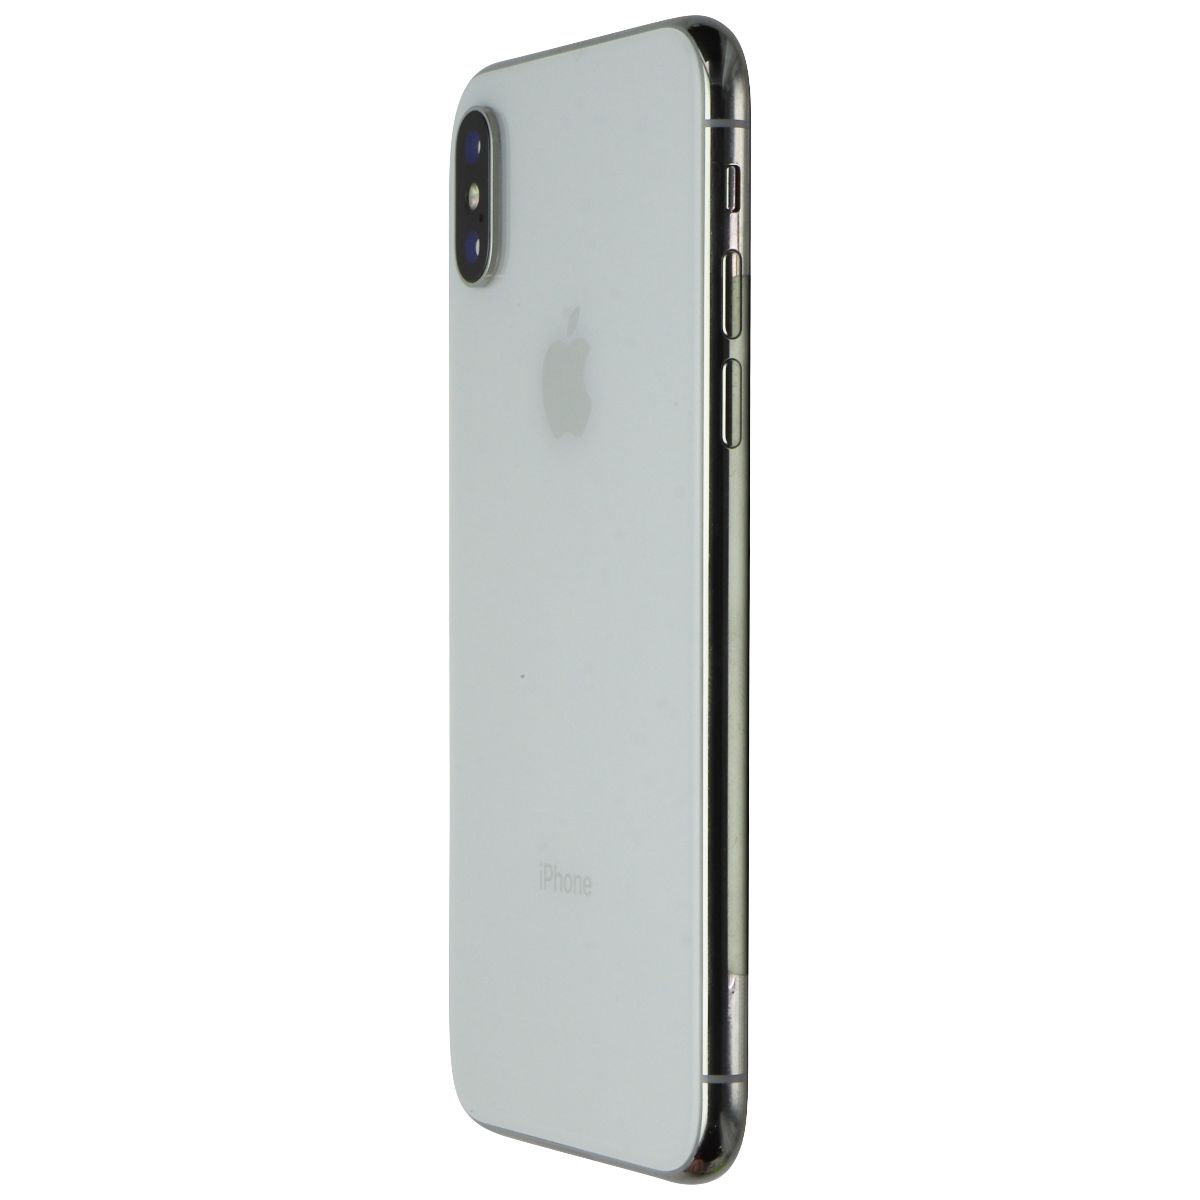 Apple iPhone X (5.8-inch) Smartphone (A1865) Unlocked - 64GB / Silver Cell Phones & Smartphones Apple    - Simple Cell Bulk Wholesale Pricing - USA Seller